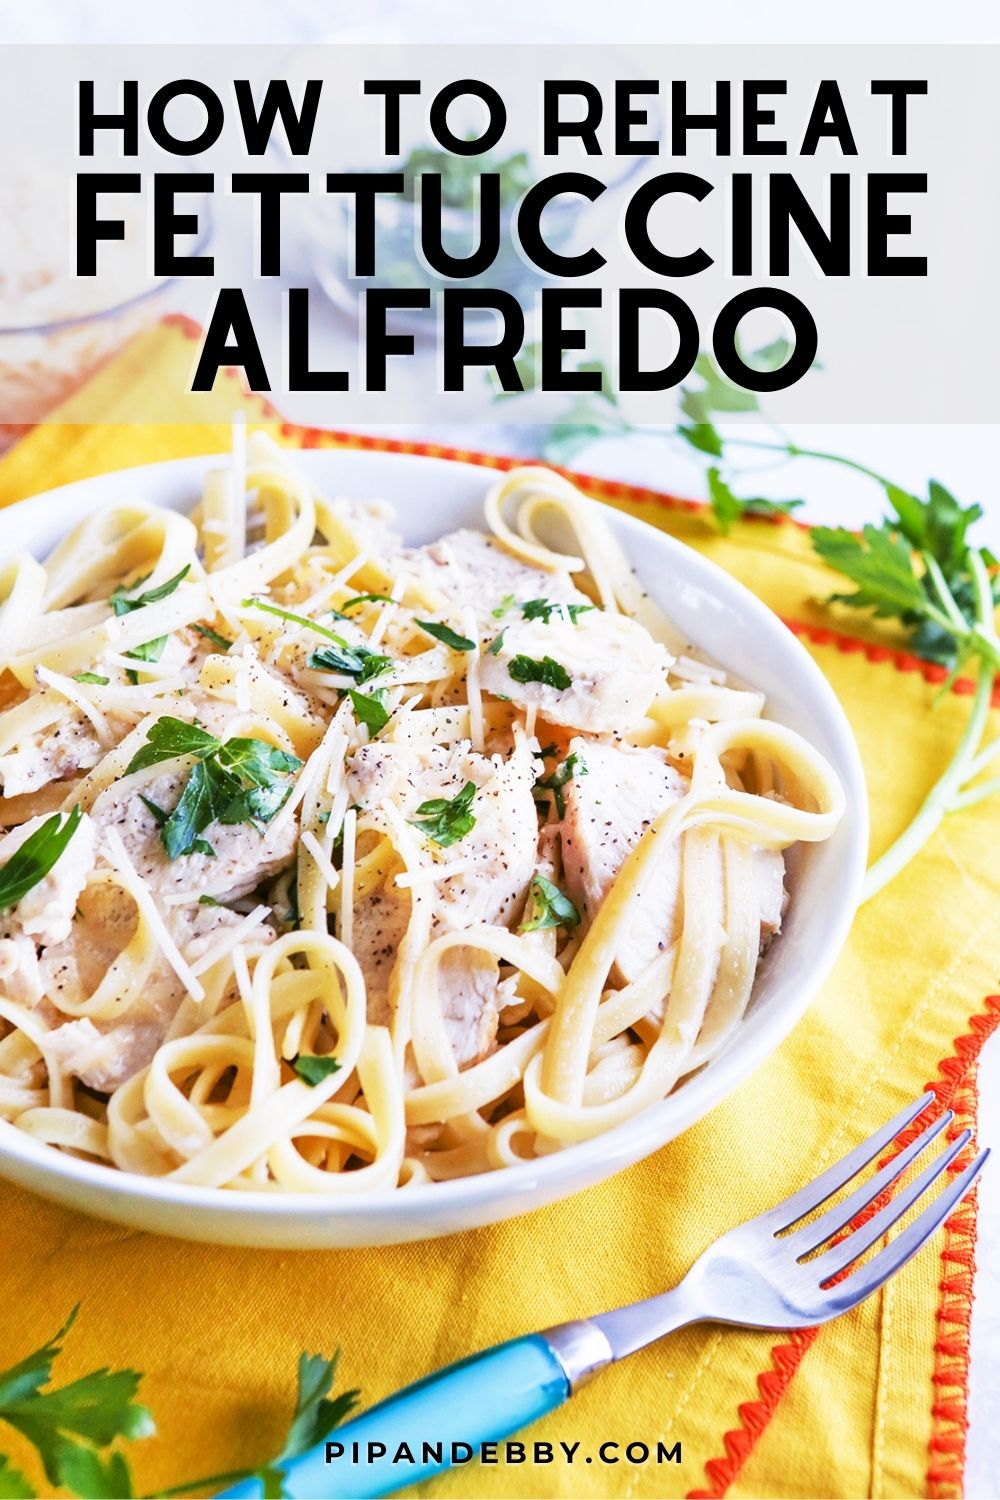 Photo of fettuccine alfredo with text overlay reading, "How to reheat fettuccine alfredo."